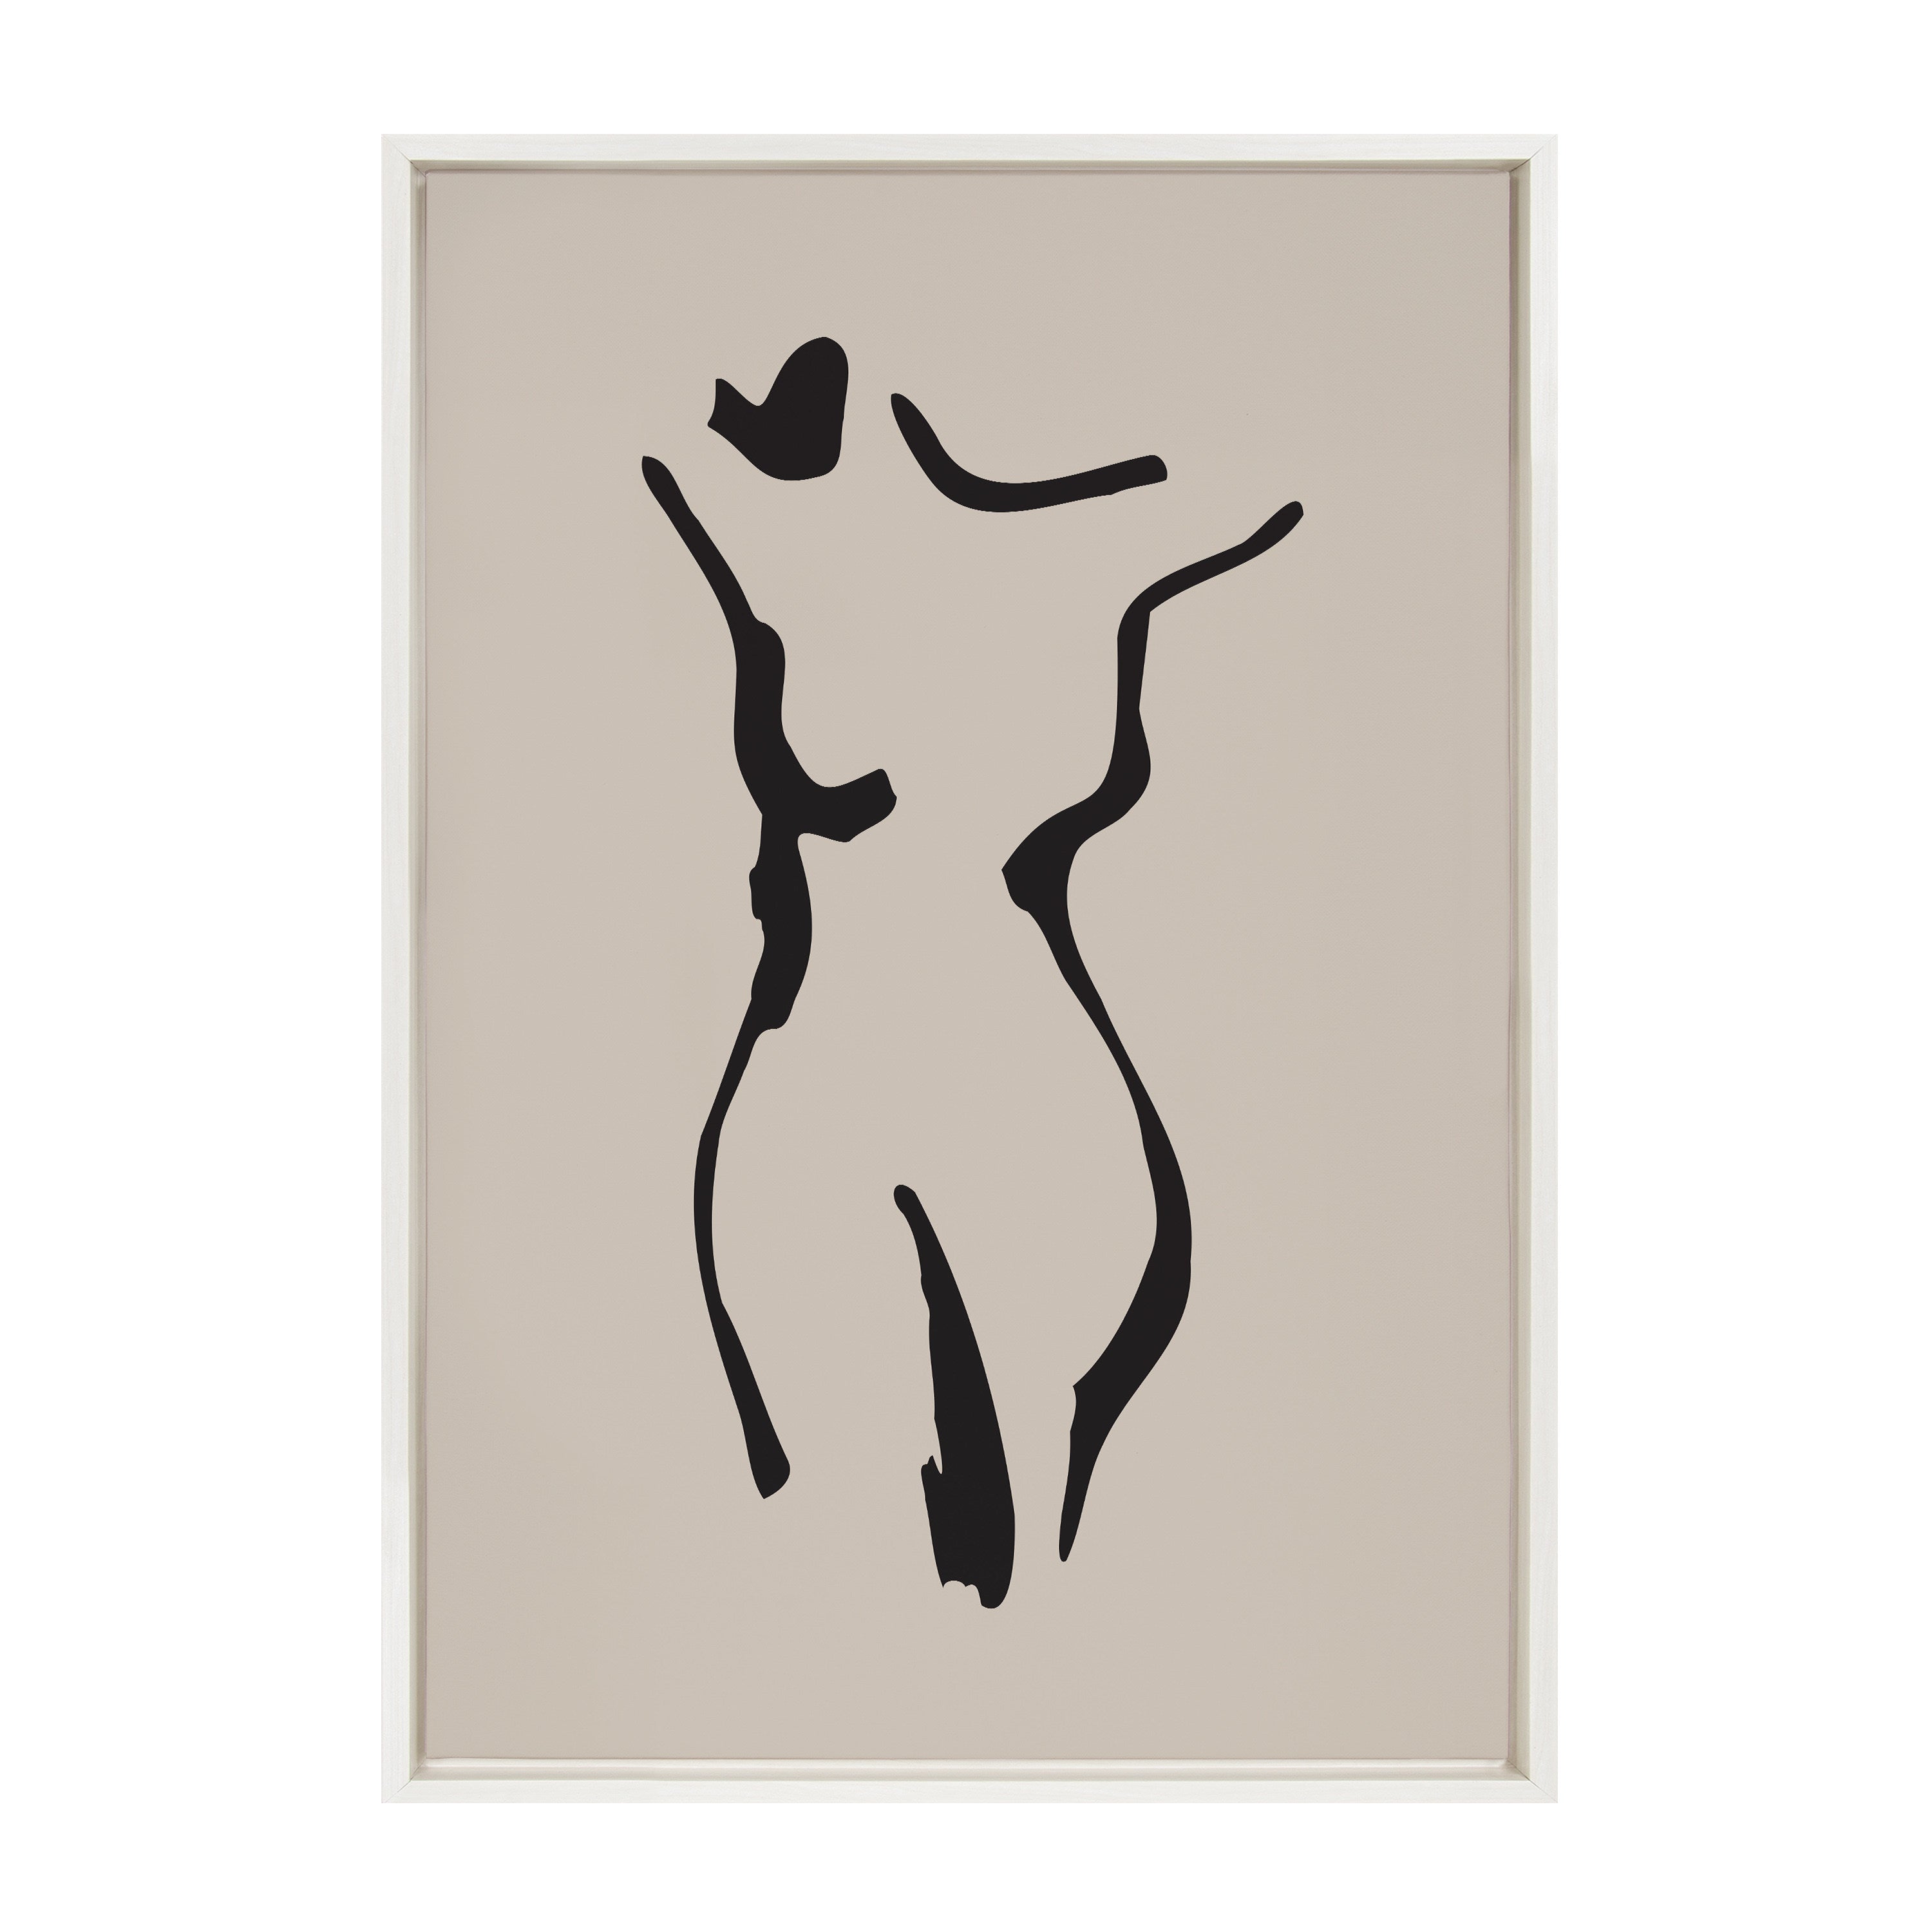 Sylvie Minimalist Neutral Line Art Drawing Body Framed Canvas by The Creative Bunch Studio